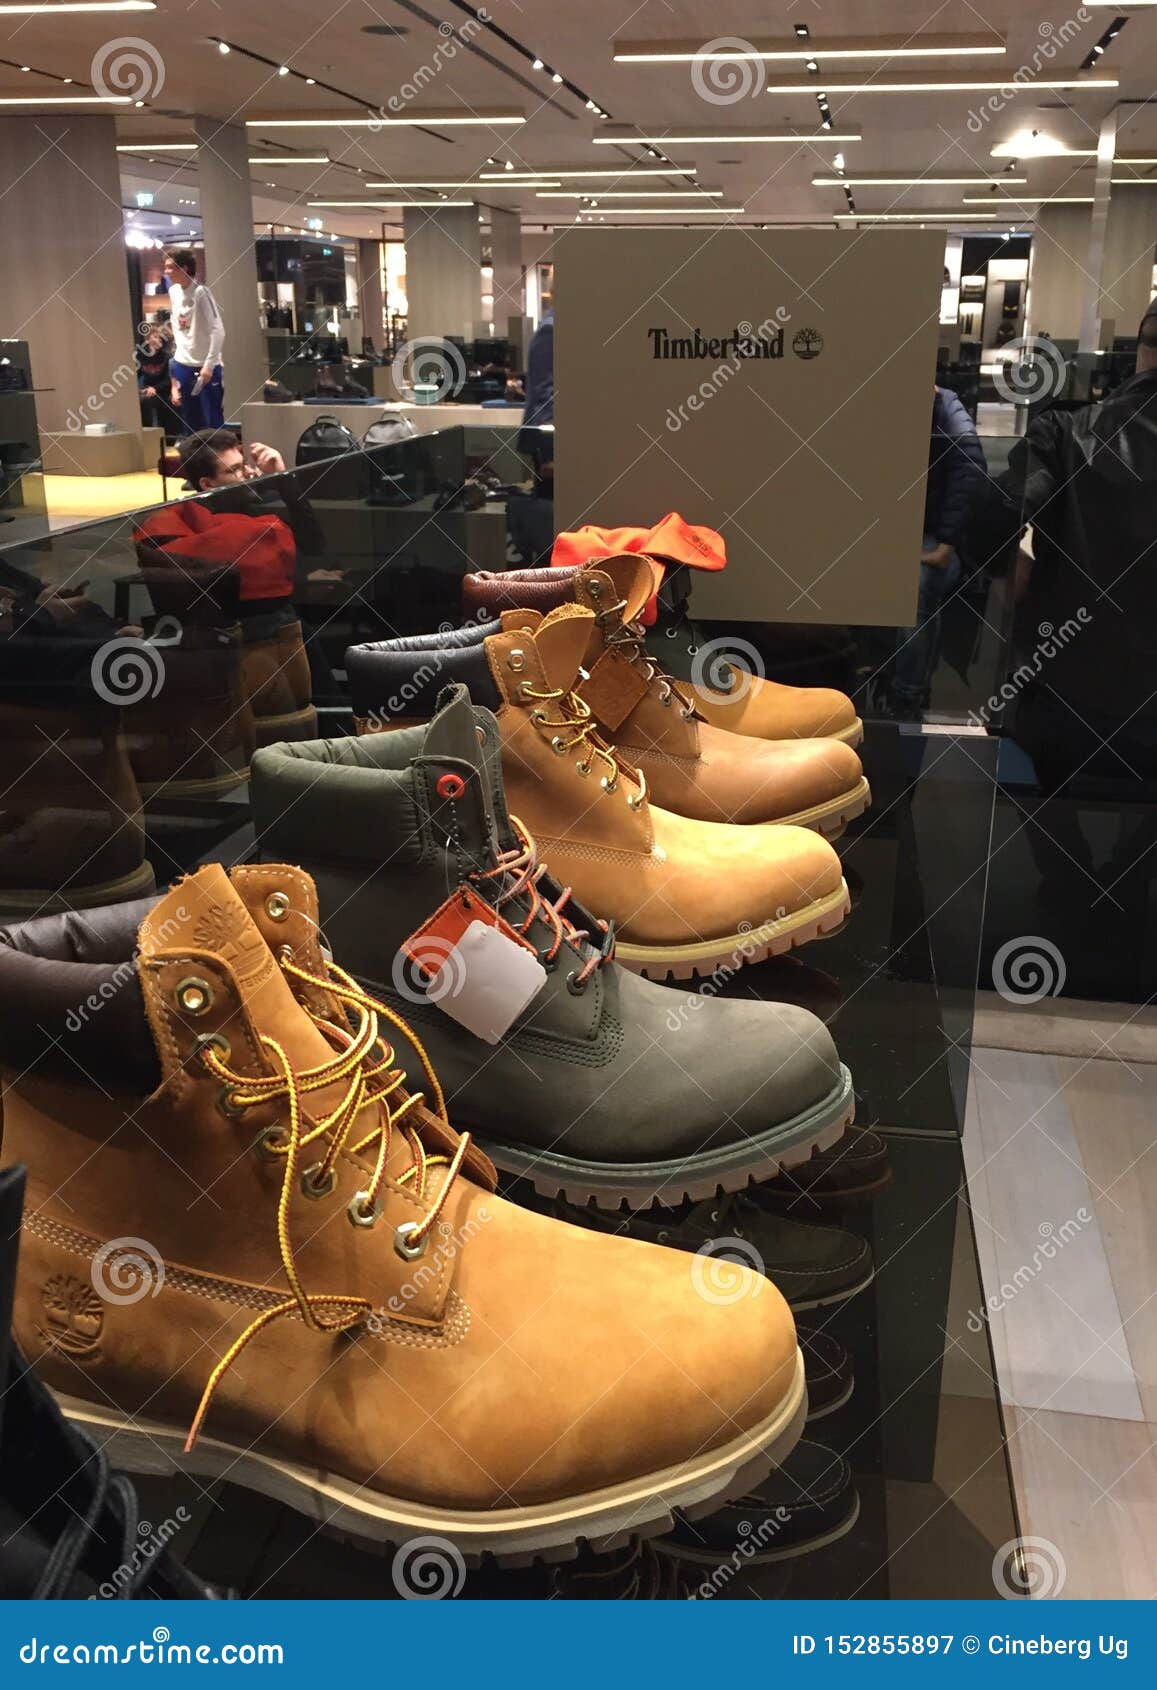 timberland shoes shop